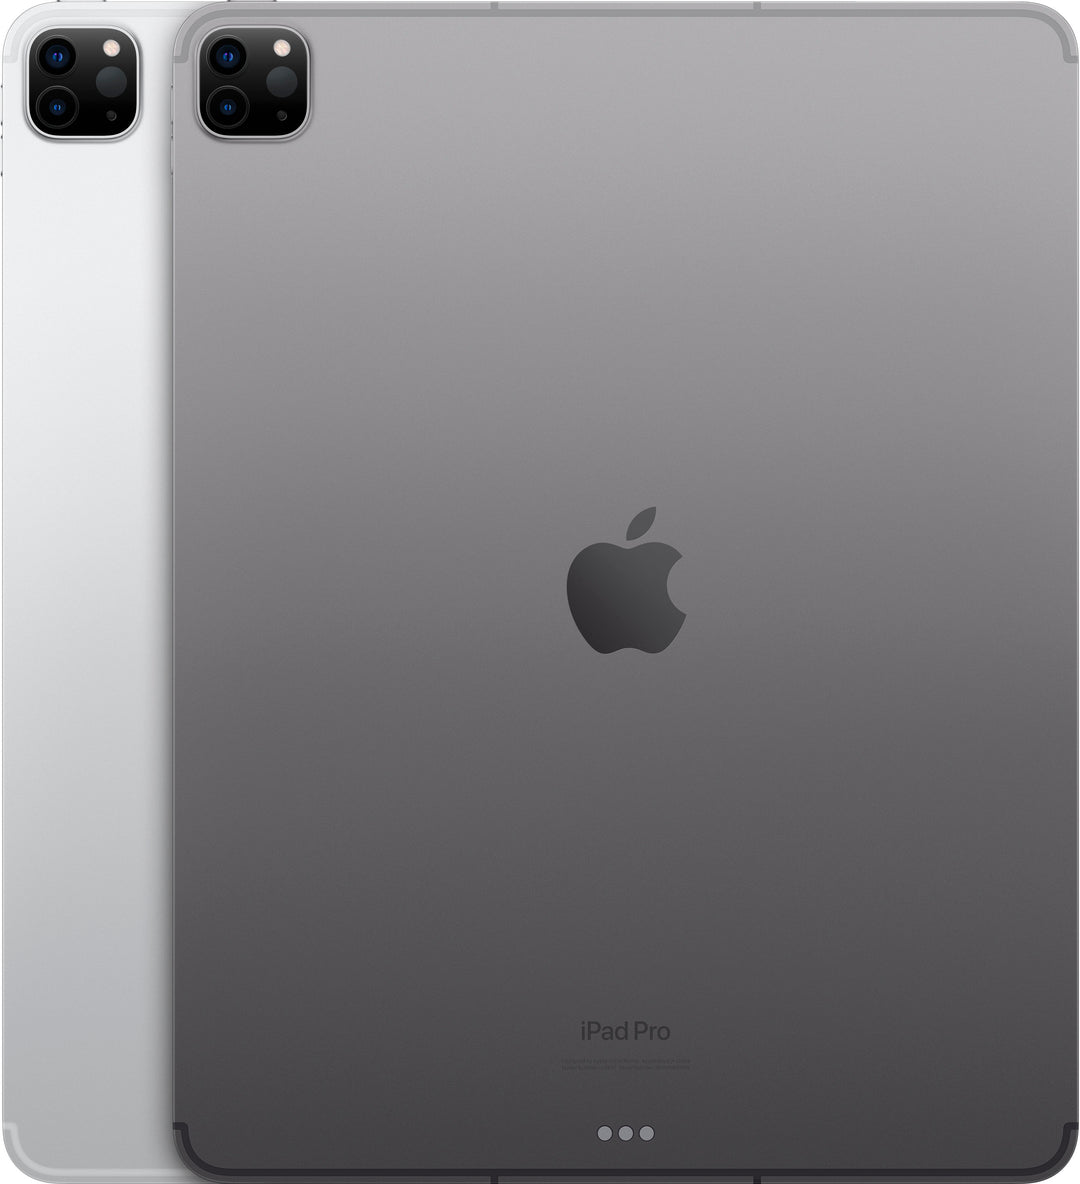 Apple - 12.9-Inch iPad Pro (Latest Model) with Wi-Fi + Cellular - 1TB - Space Gray (Unlocked)_4